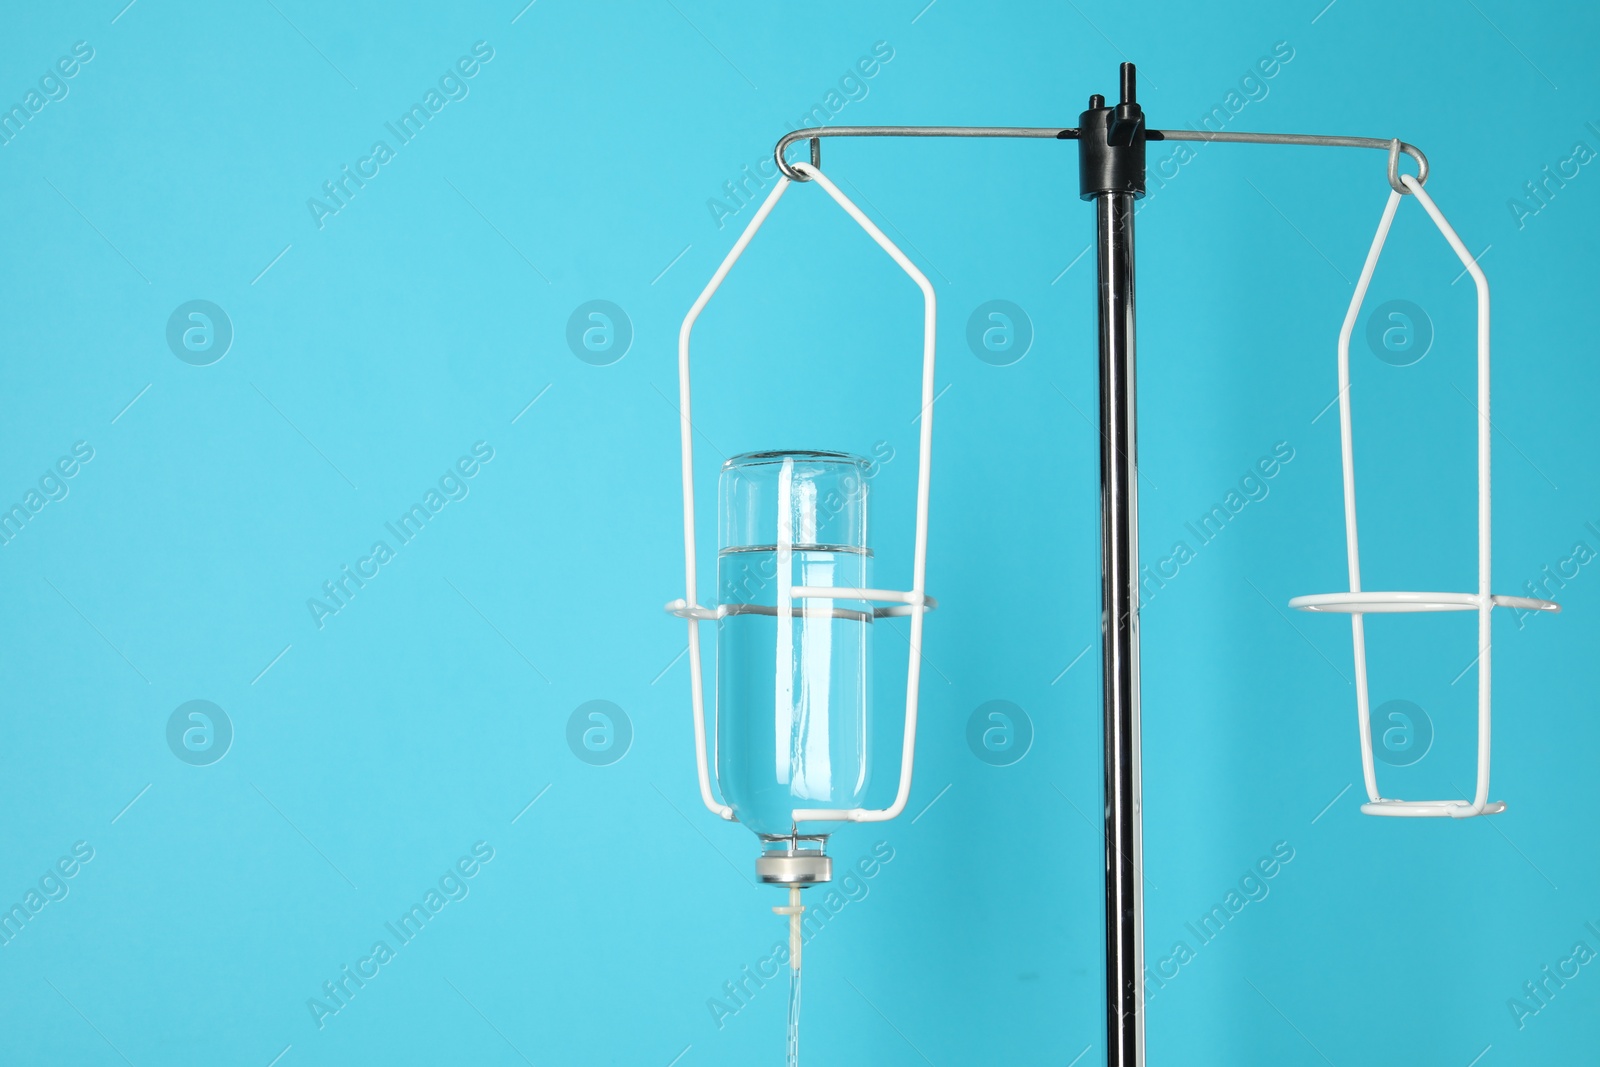 Photo of IV infusion set on pole against light blue background. Space for text